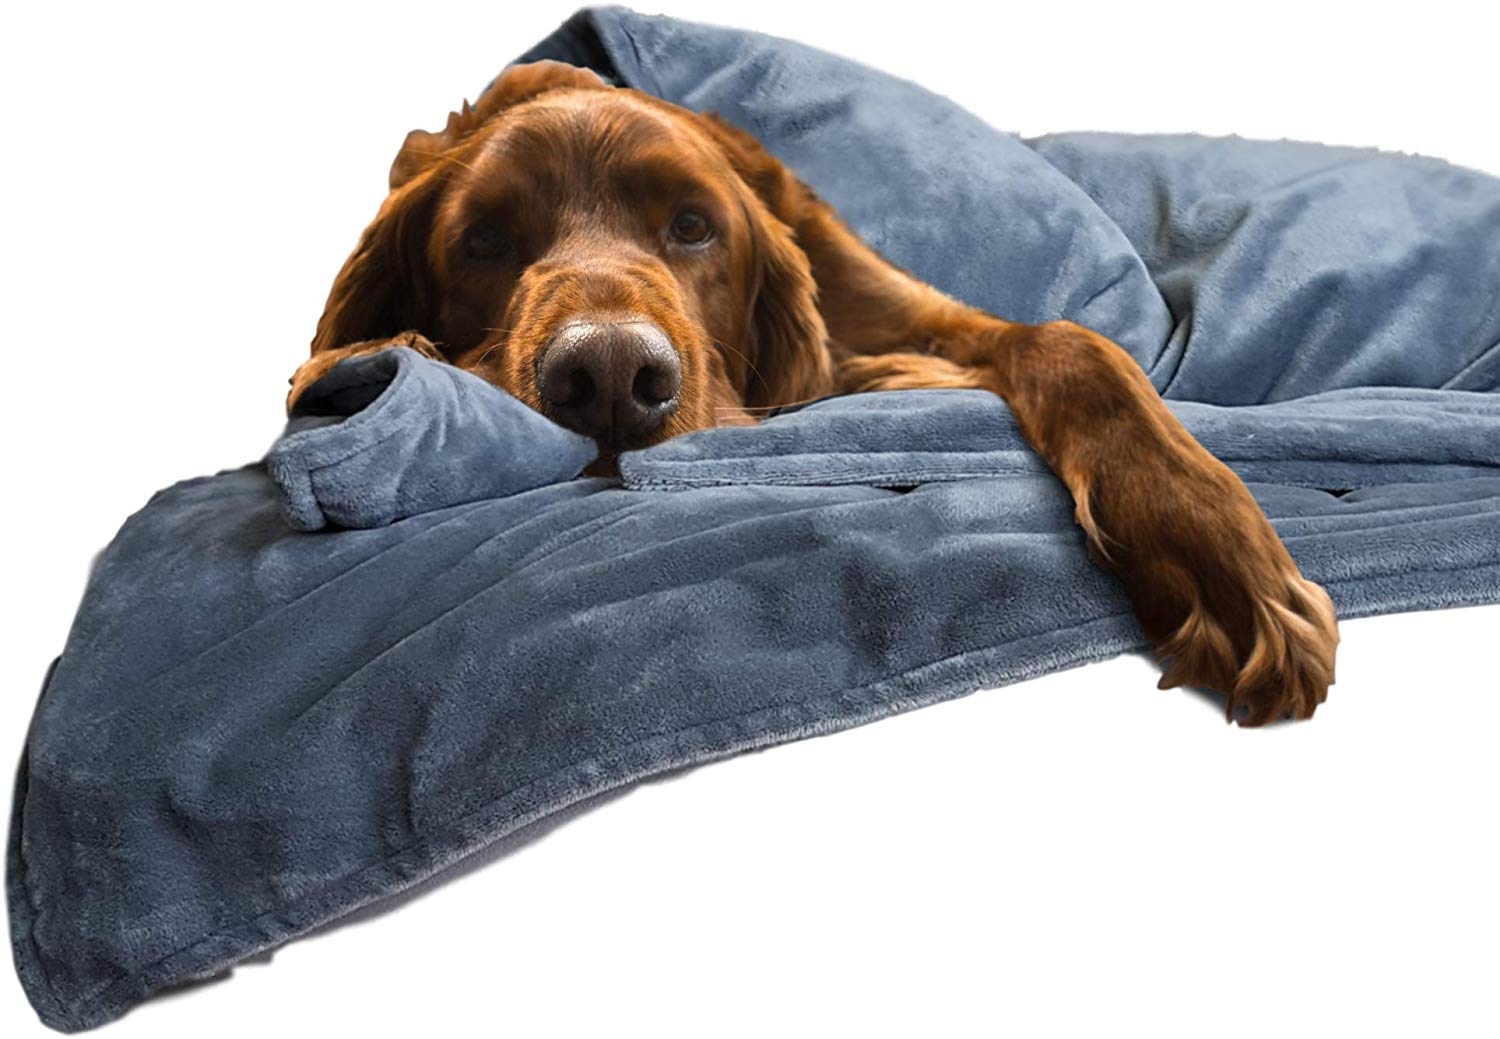 Canine Coddler The Original Dog Anti-Anxiety Blanket Wrap for Stress Relief and Calming with Premium Washable Cover Great for Separation Anxiety Bark Control